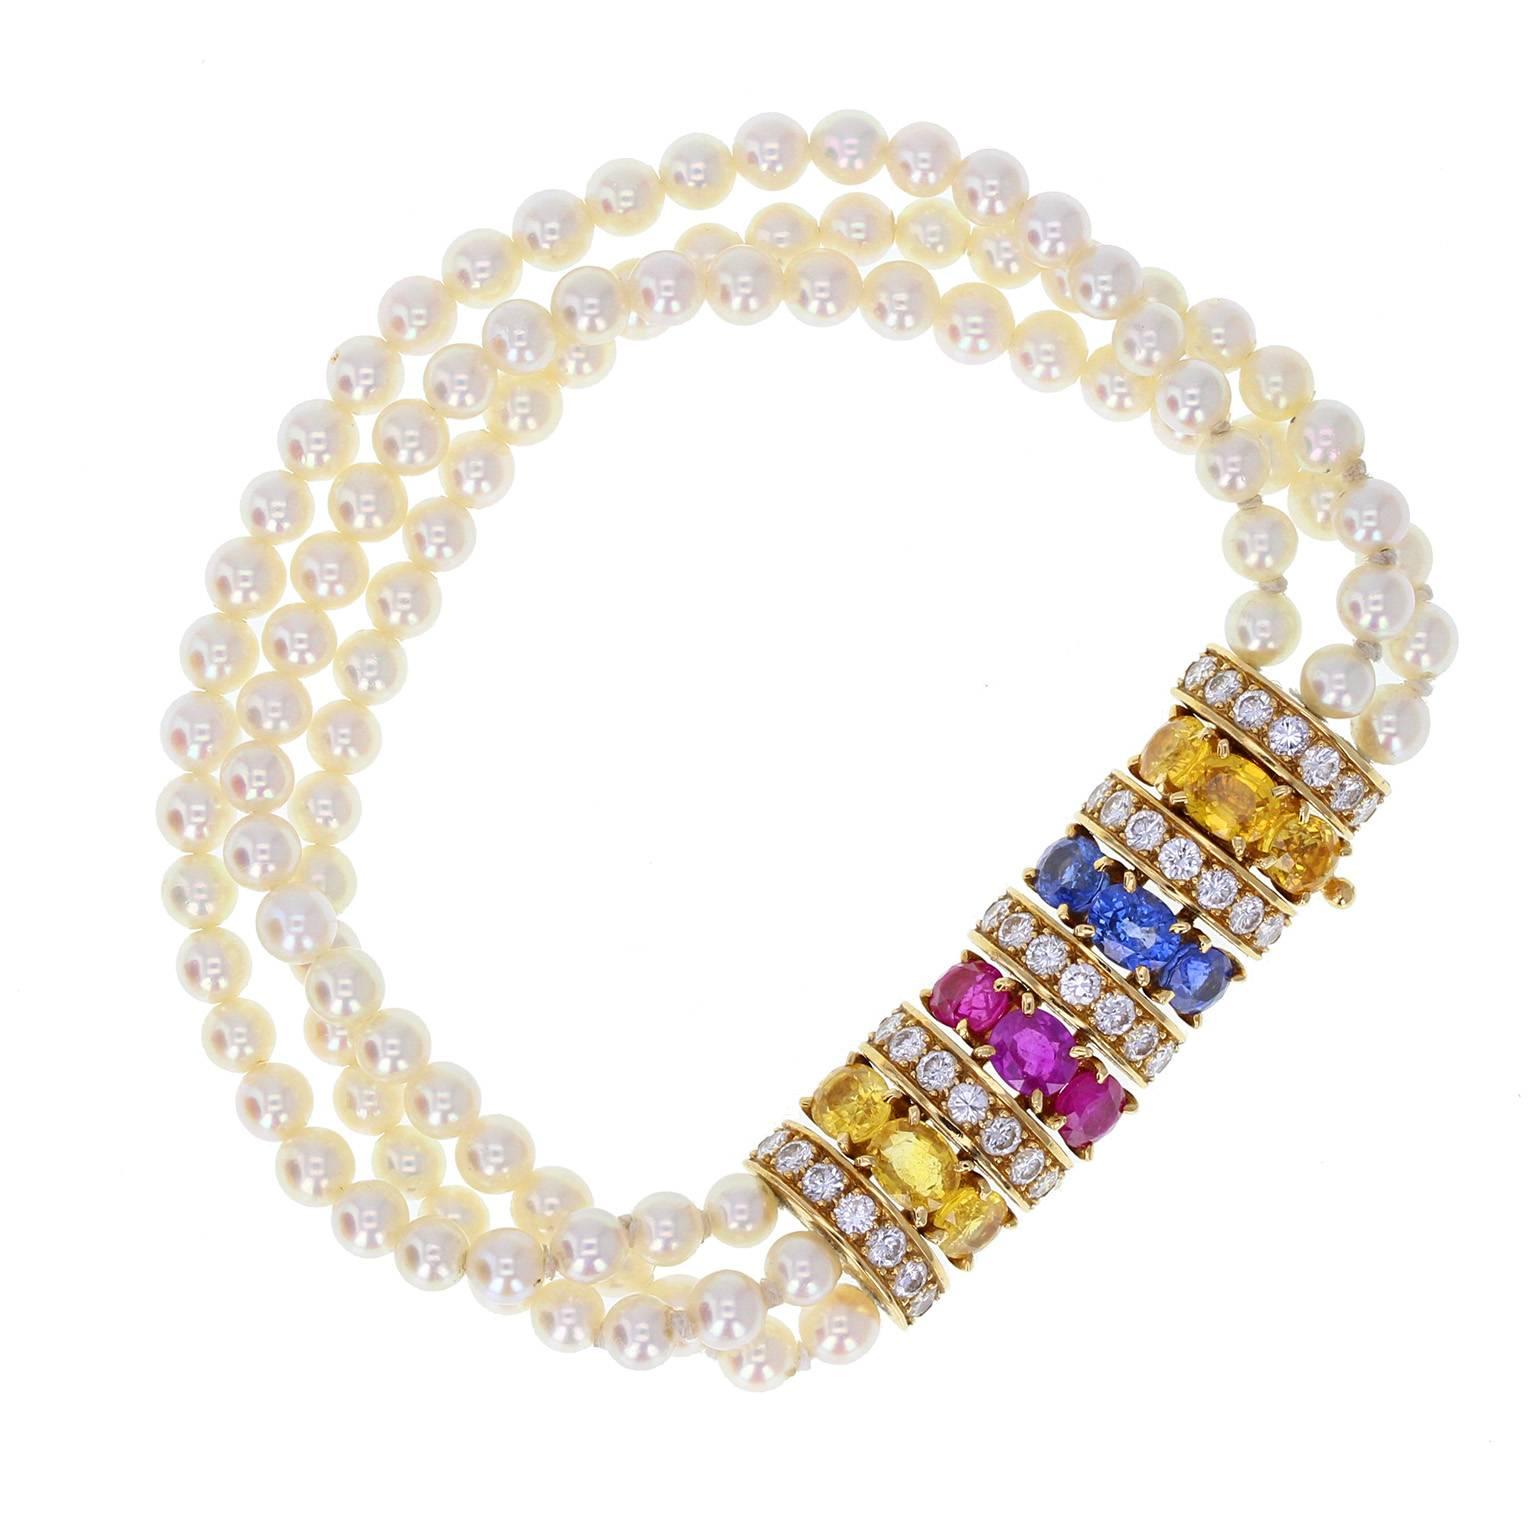 A stunning vintage parure by Van Cleef & Arpels Paris, comprising a bracelet, necklace and pair of earrings. Necklace and bracelet in the form of three rows of cultured, saltwater pearls, gently graduating from 4 to 4.5mm, terminating at a